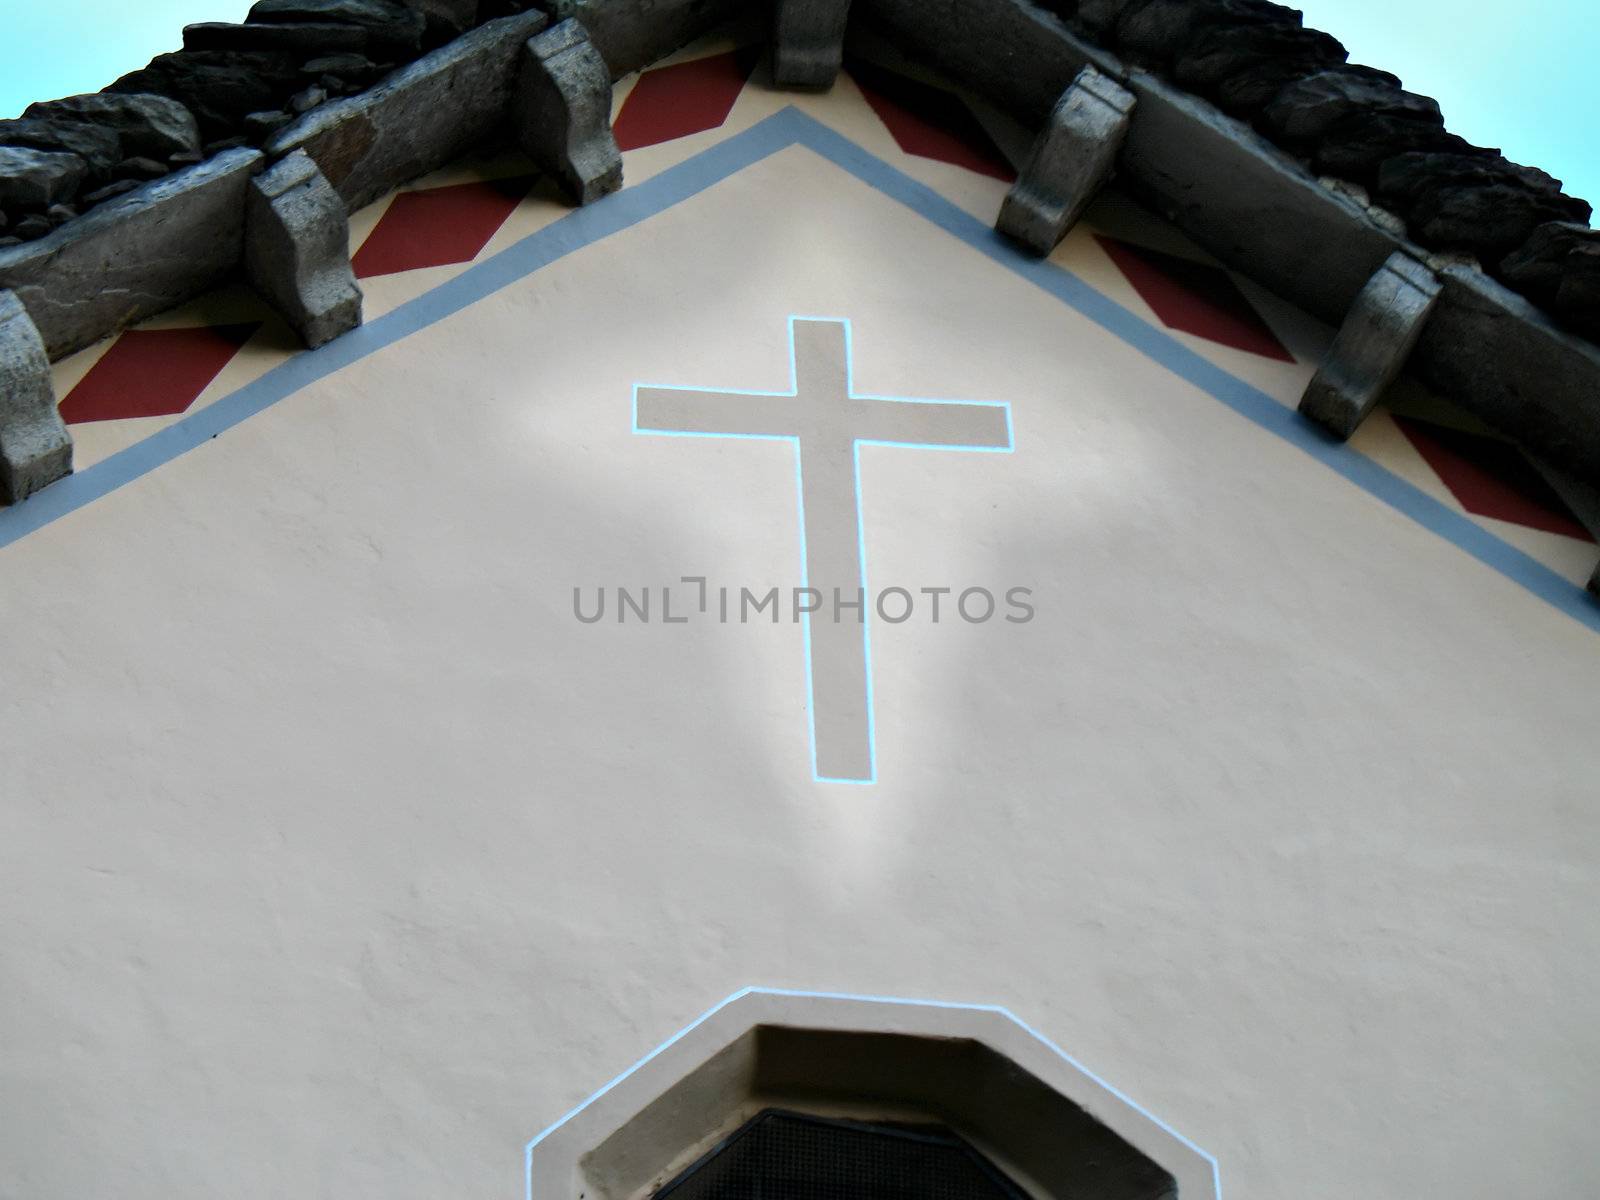 A small catholic church in the country with an illuminated painted cross